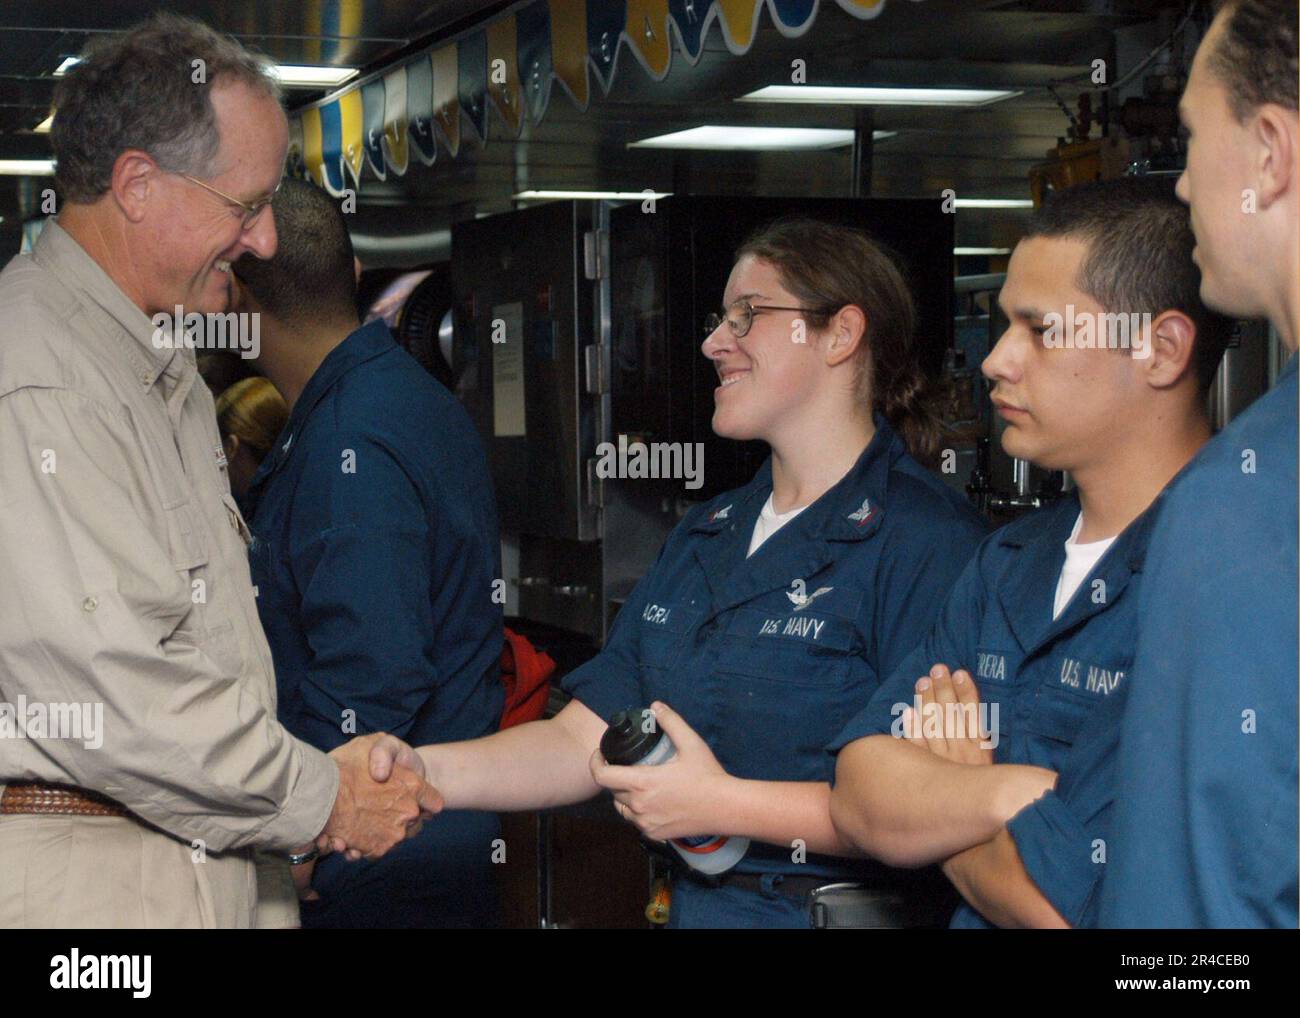 US Navy  Congressman Mike Conaway-(R), 11th Congressional District of Texas, meets and greets crew members aboard the amphibious assault ship USS Kearsarge (LHD 3) during exercise PANAMAX 2006. Stock Photo